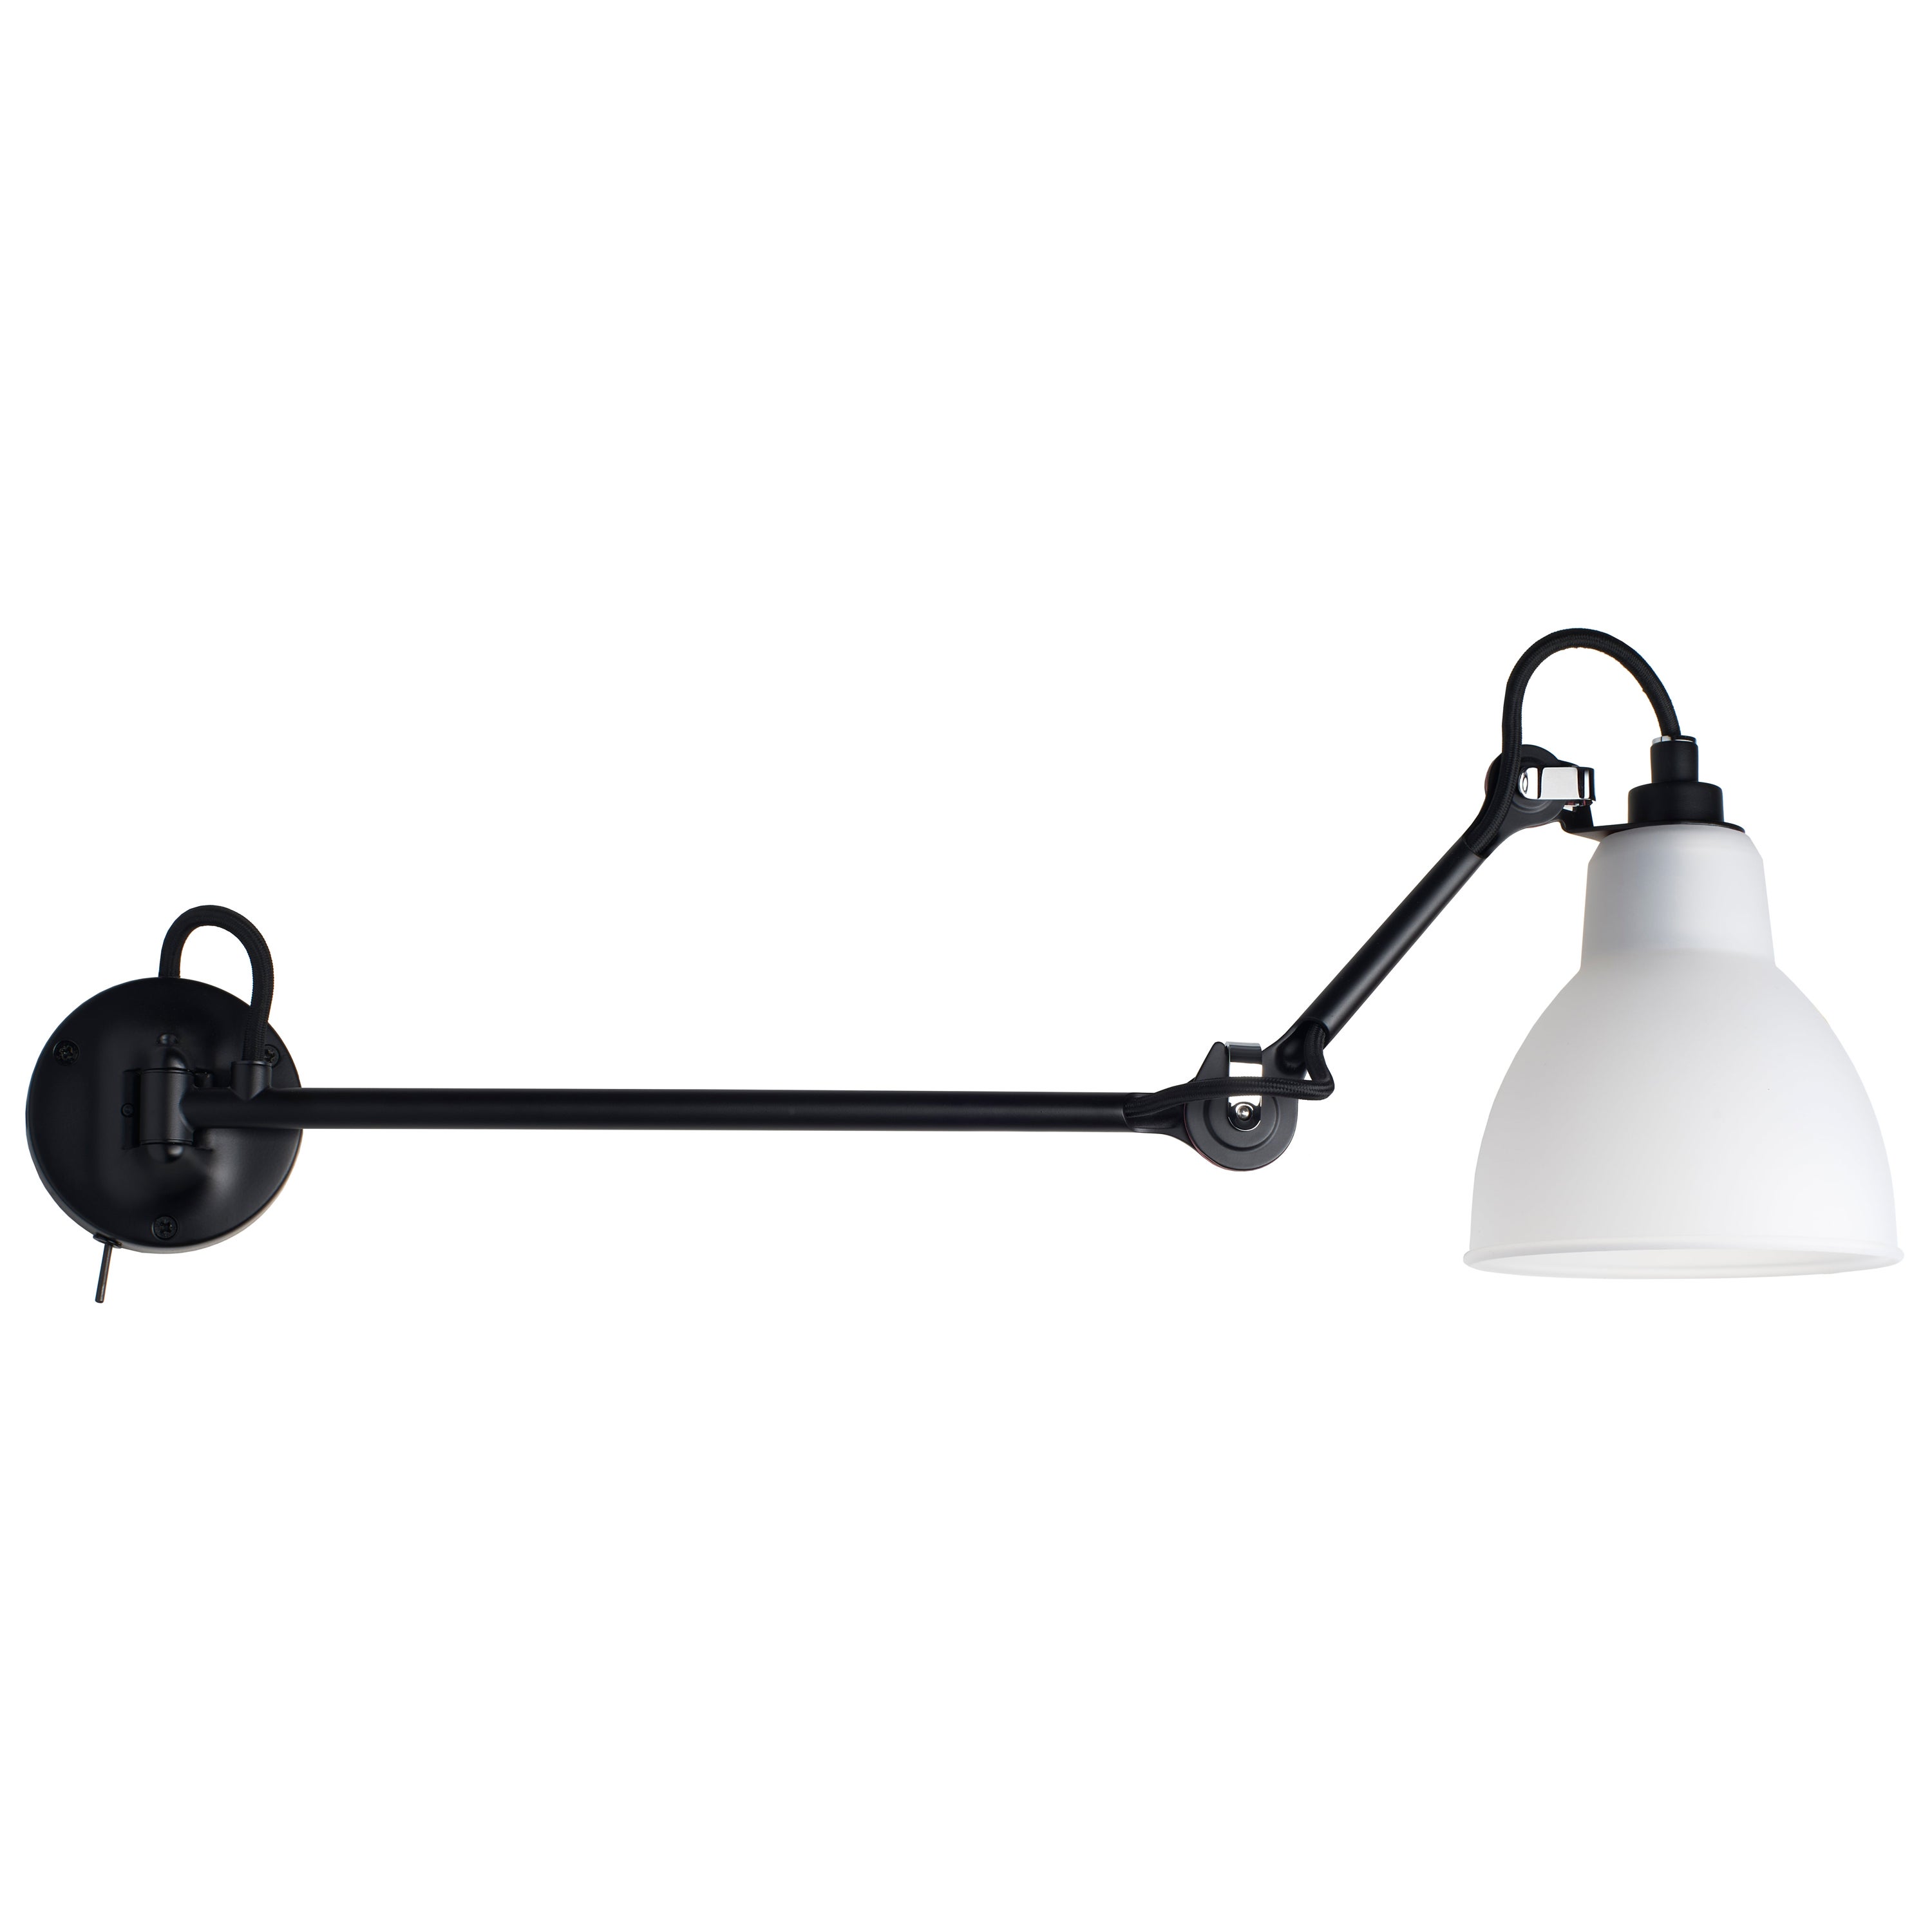 DCW Editions La Lampe Gras N°204 L40 SW Wall Lamp in Black & Polycarbonate Shade For Sale